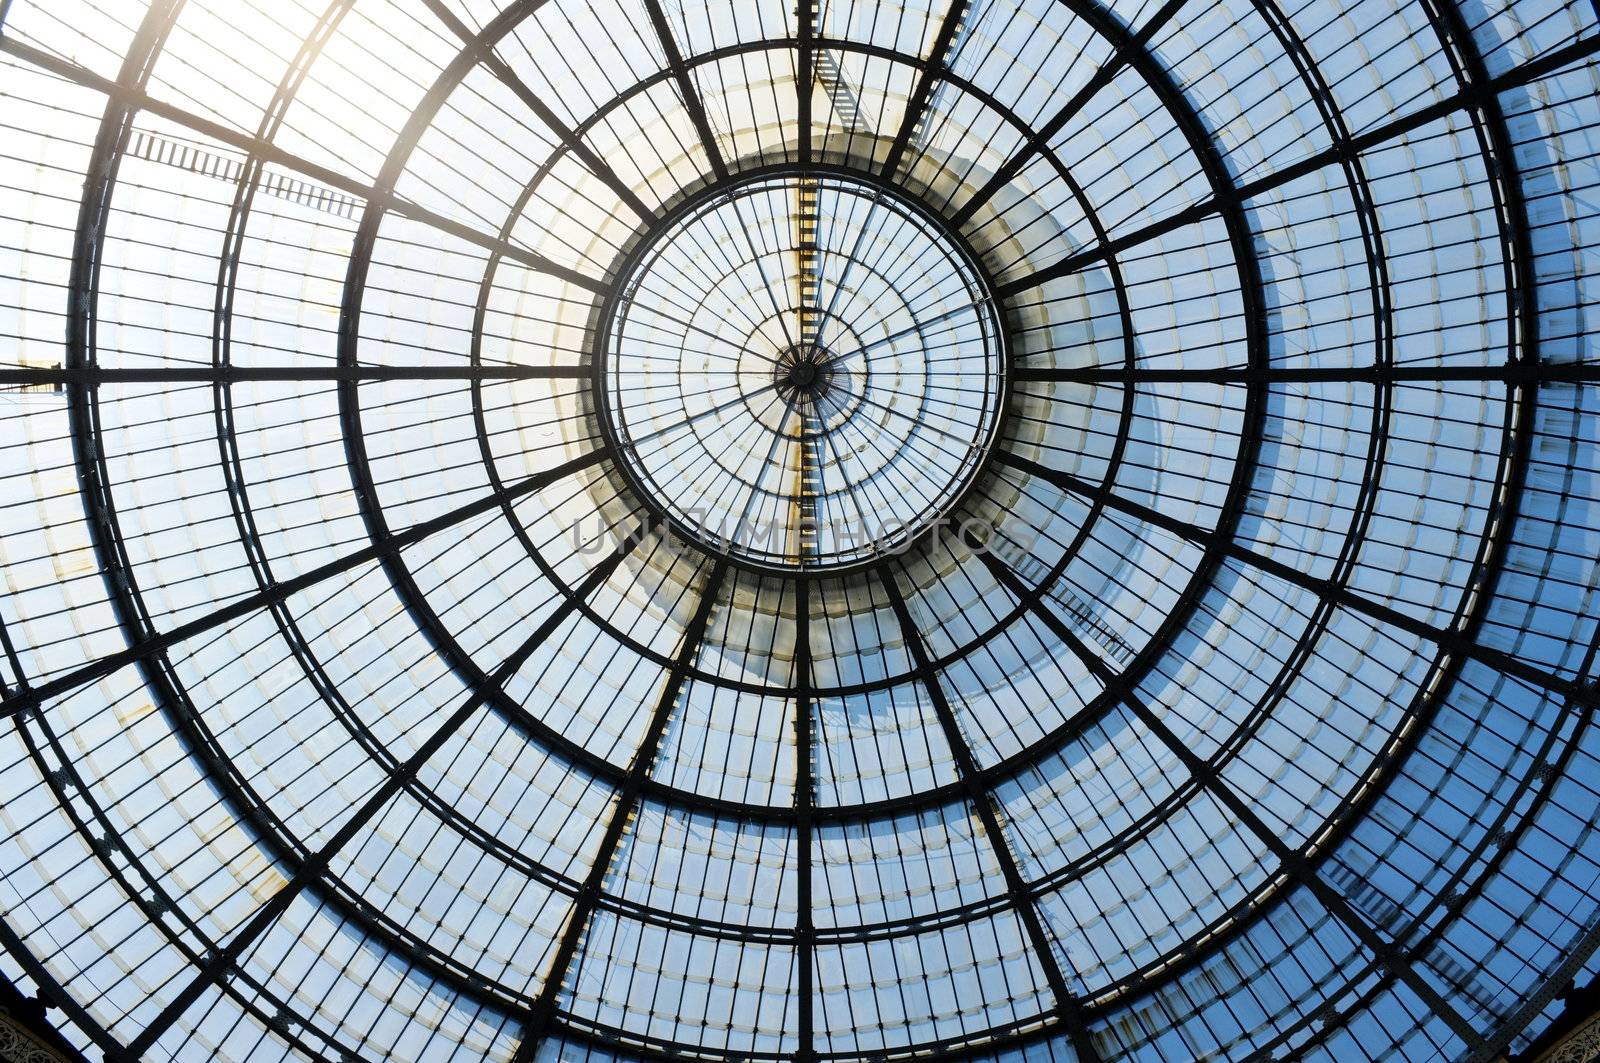 The old glass dome of Galleria Vittorio Emanuele II, Milan, Italy.